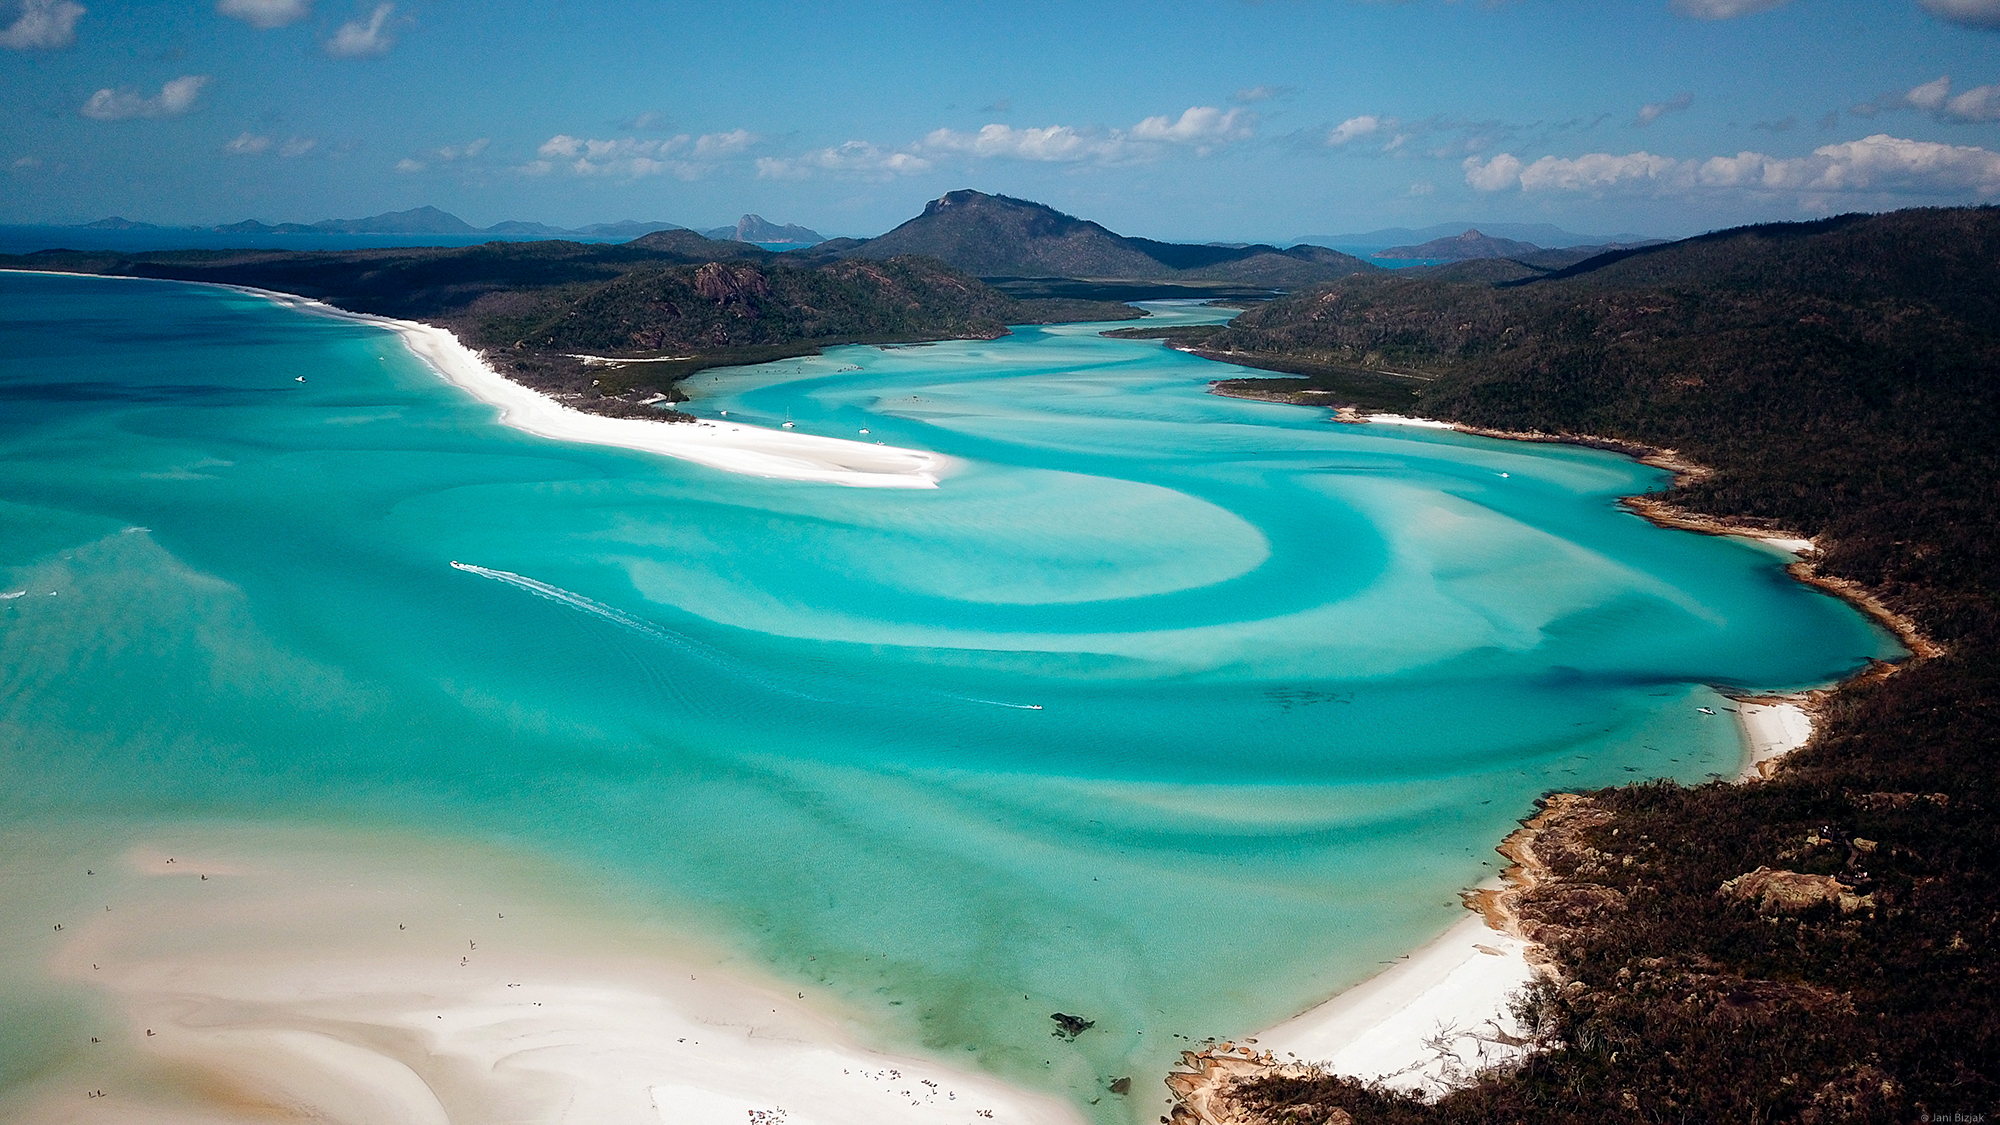 Whitsundays from air, taken by our skipper.